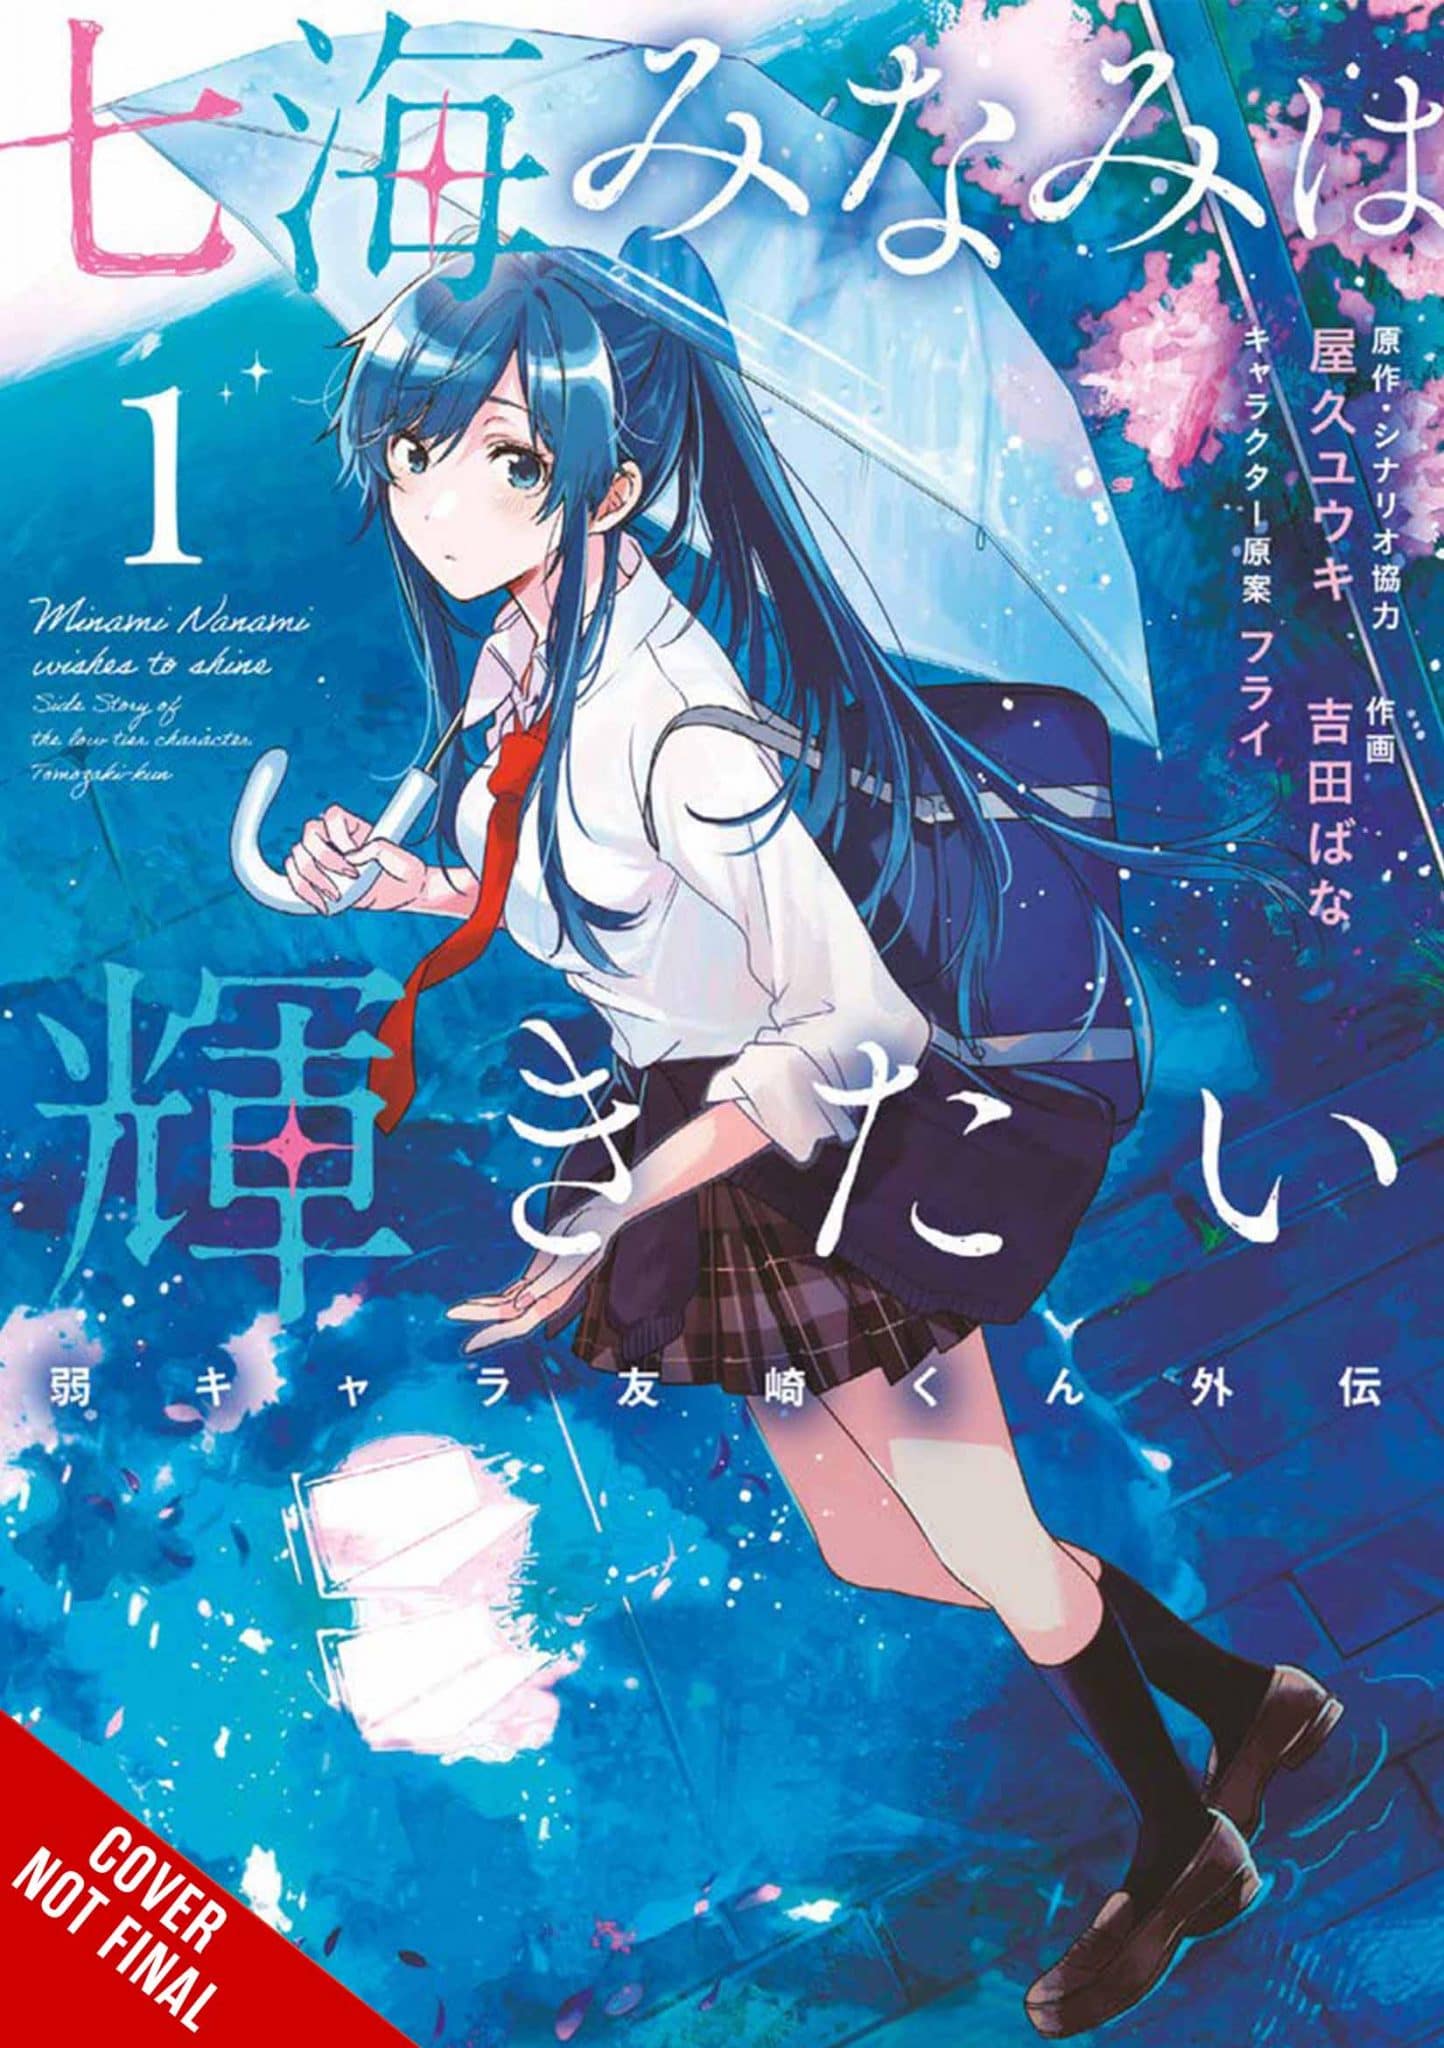 Yen Press Reveals 13 New Acquisitions To Release In February 2022